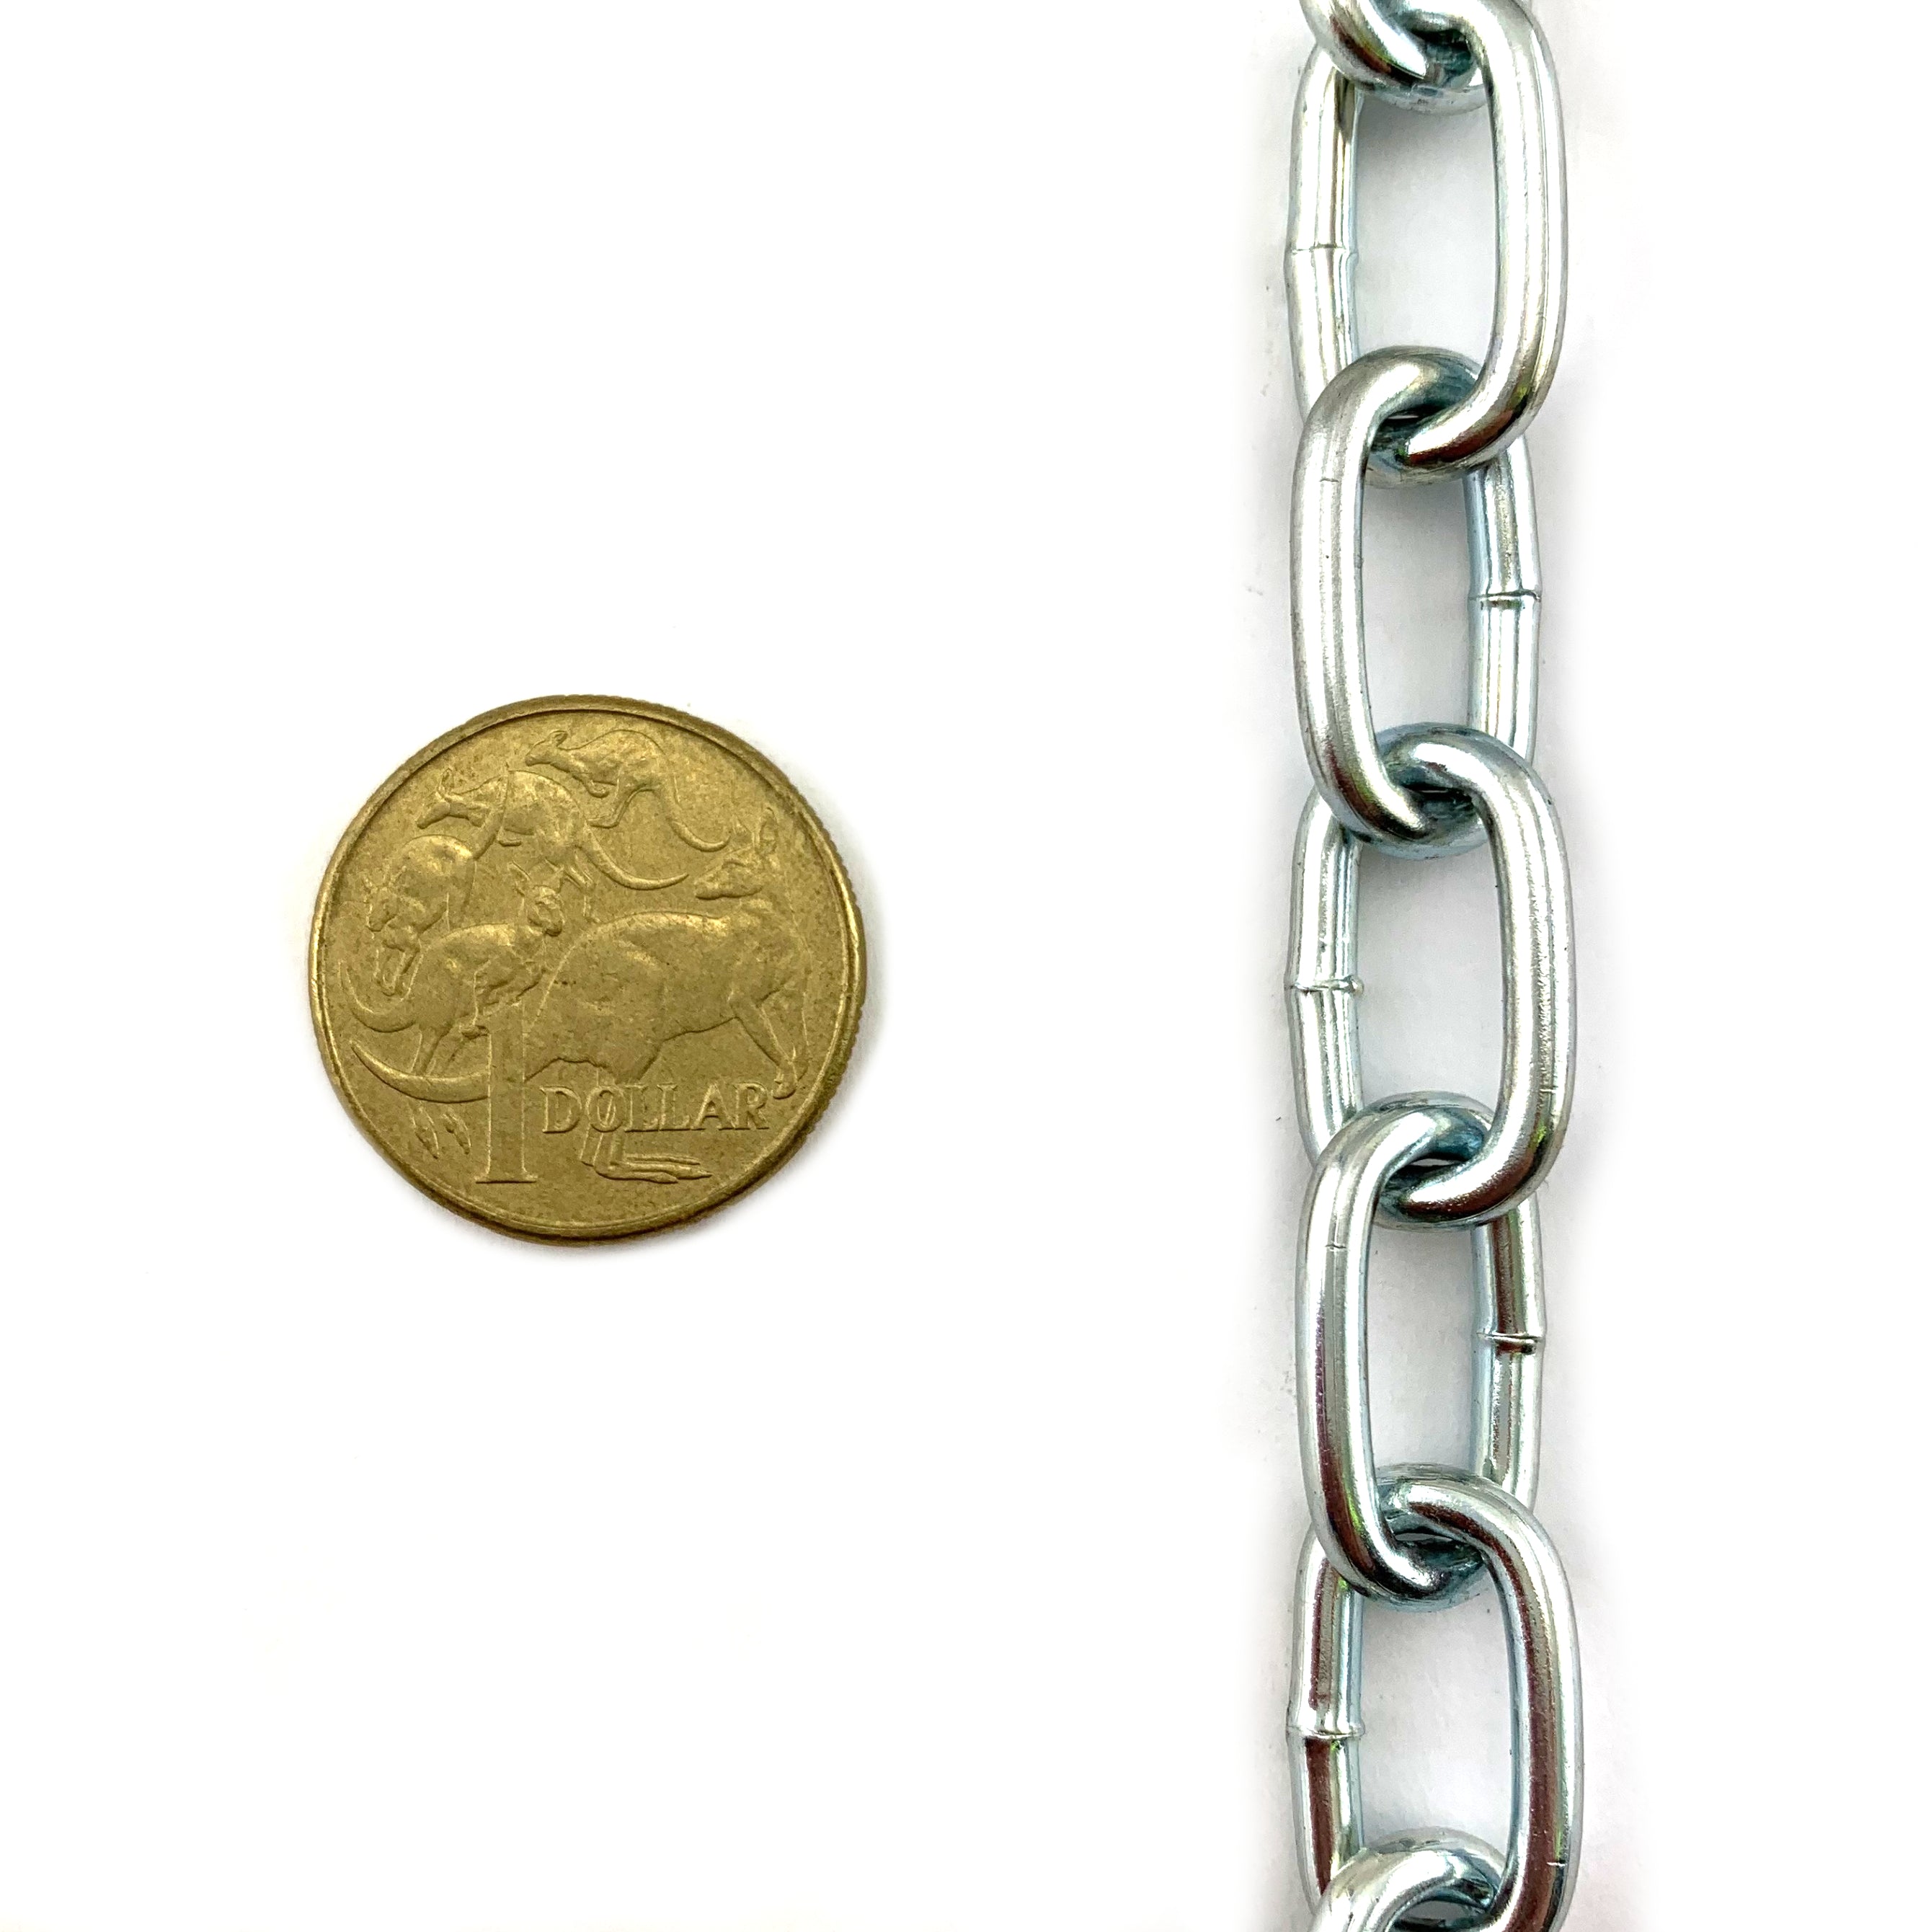 Welded Link Chain - Zinc Plated, size 3mm. Chain by the metre. Melbourne, Australia.